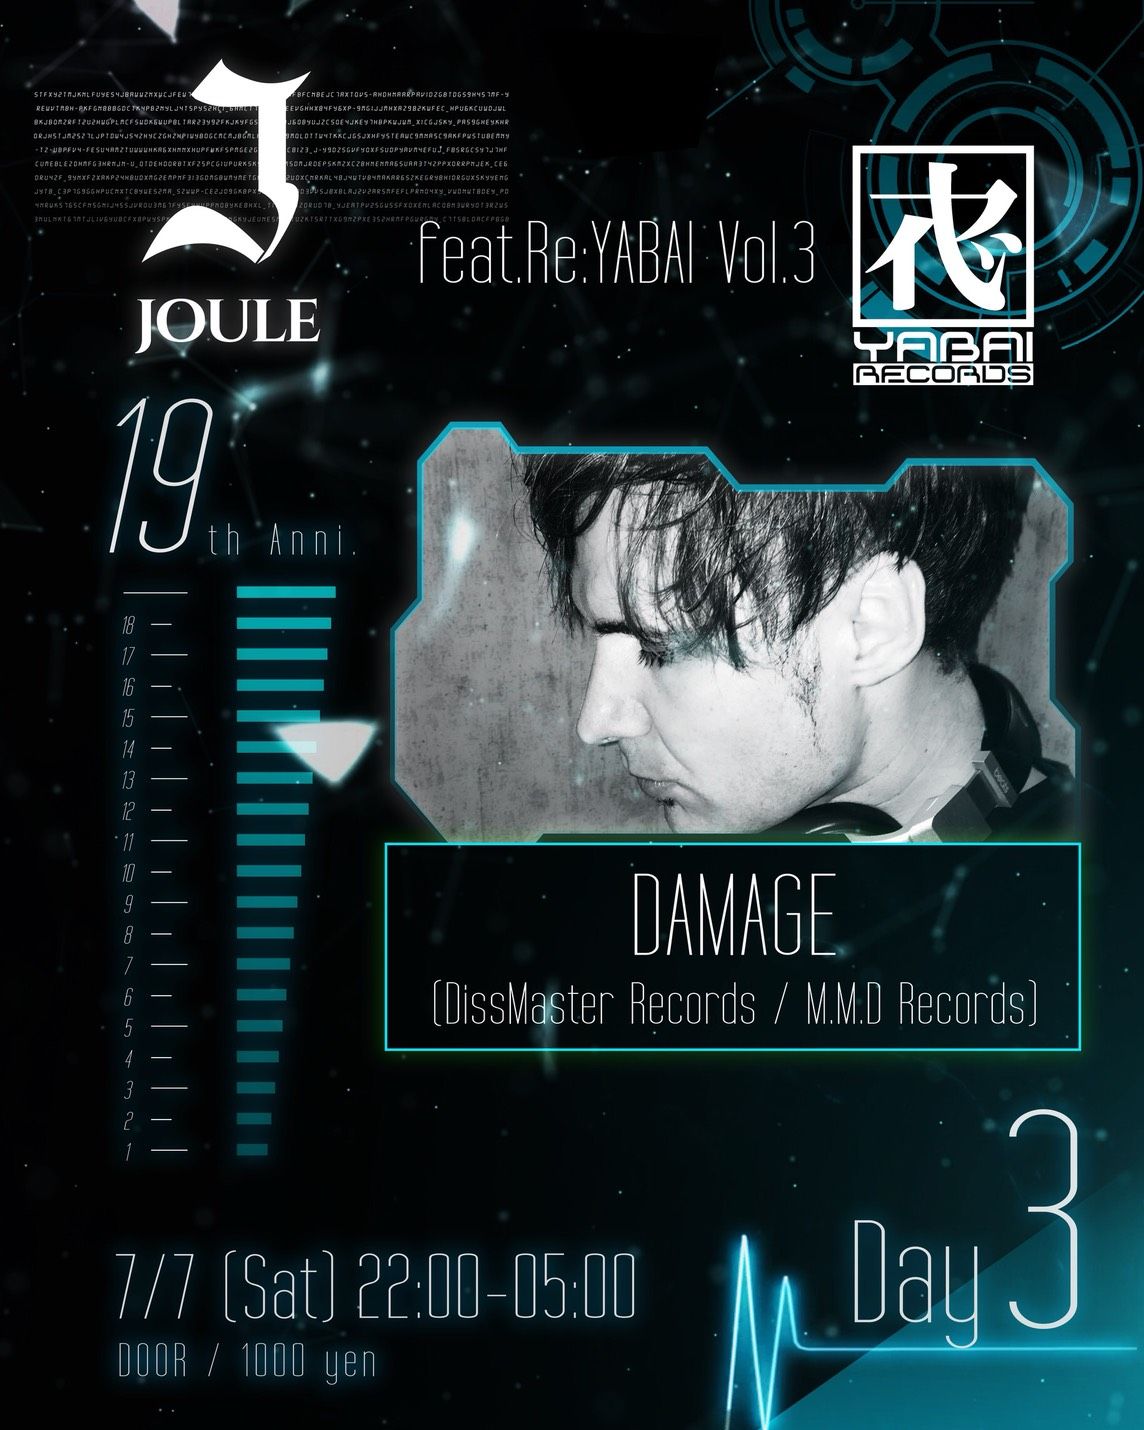 JOULE 19th Anniversary feat.Re:YABAI Vol.3